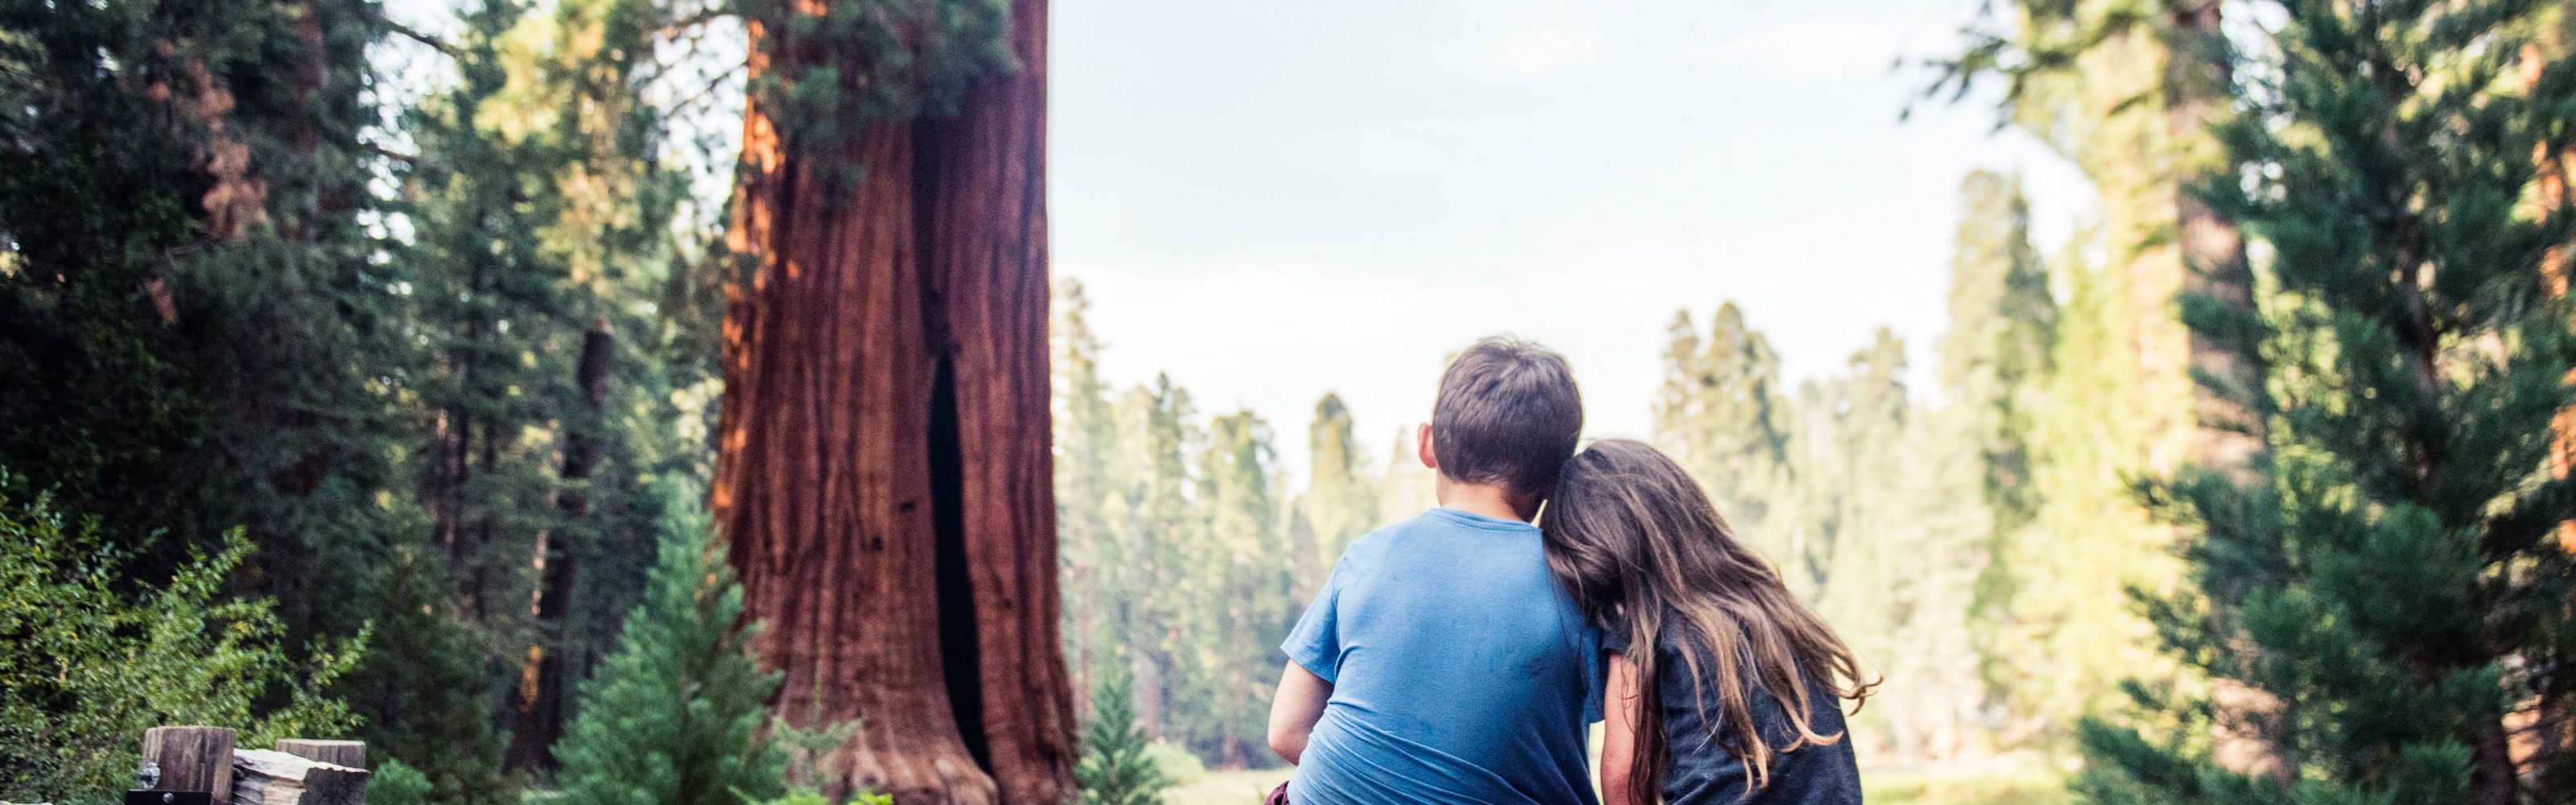 Two kids viewed from behind, sitting on a bench together in a redwood forest.